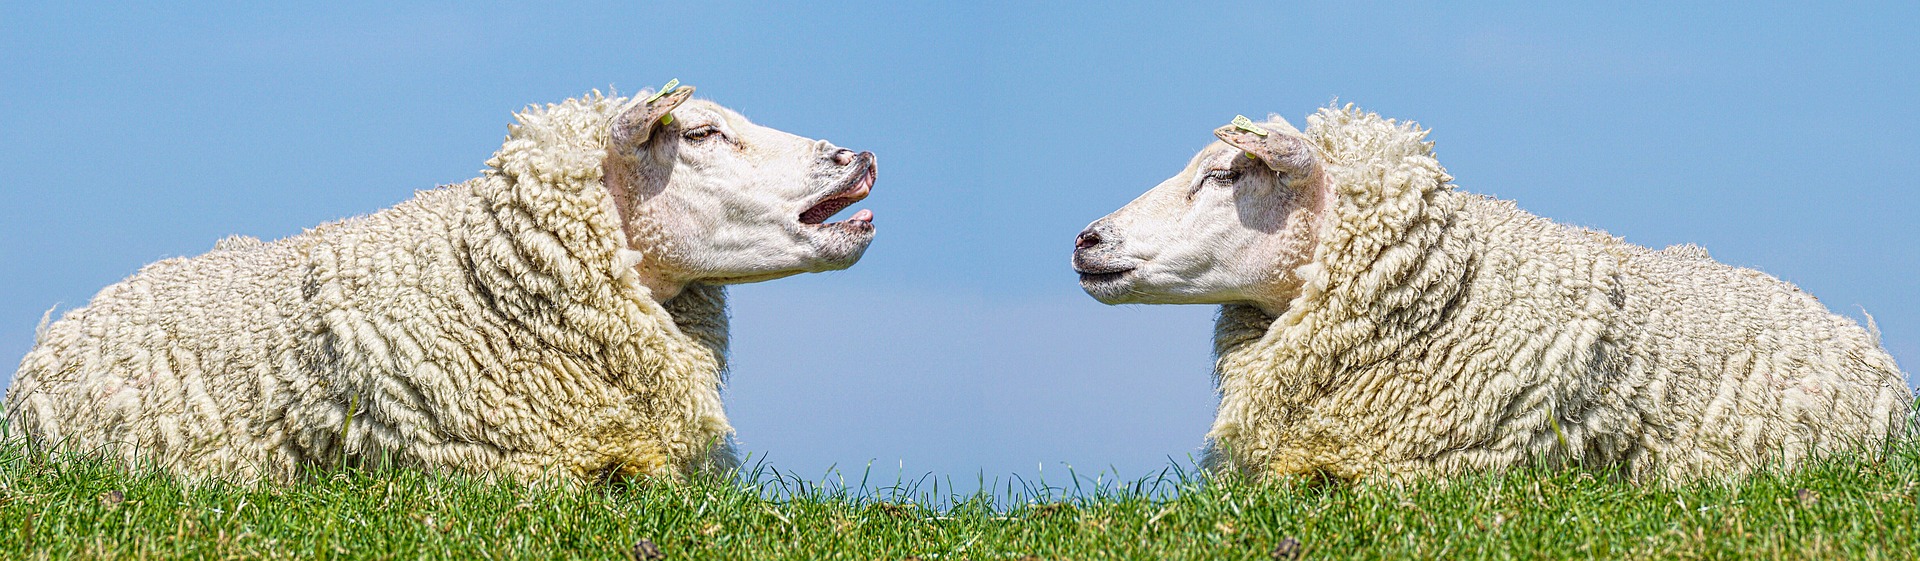 two sheeps facing each other as if communicating